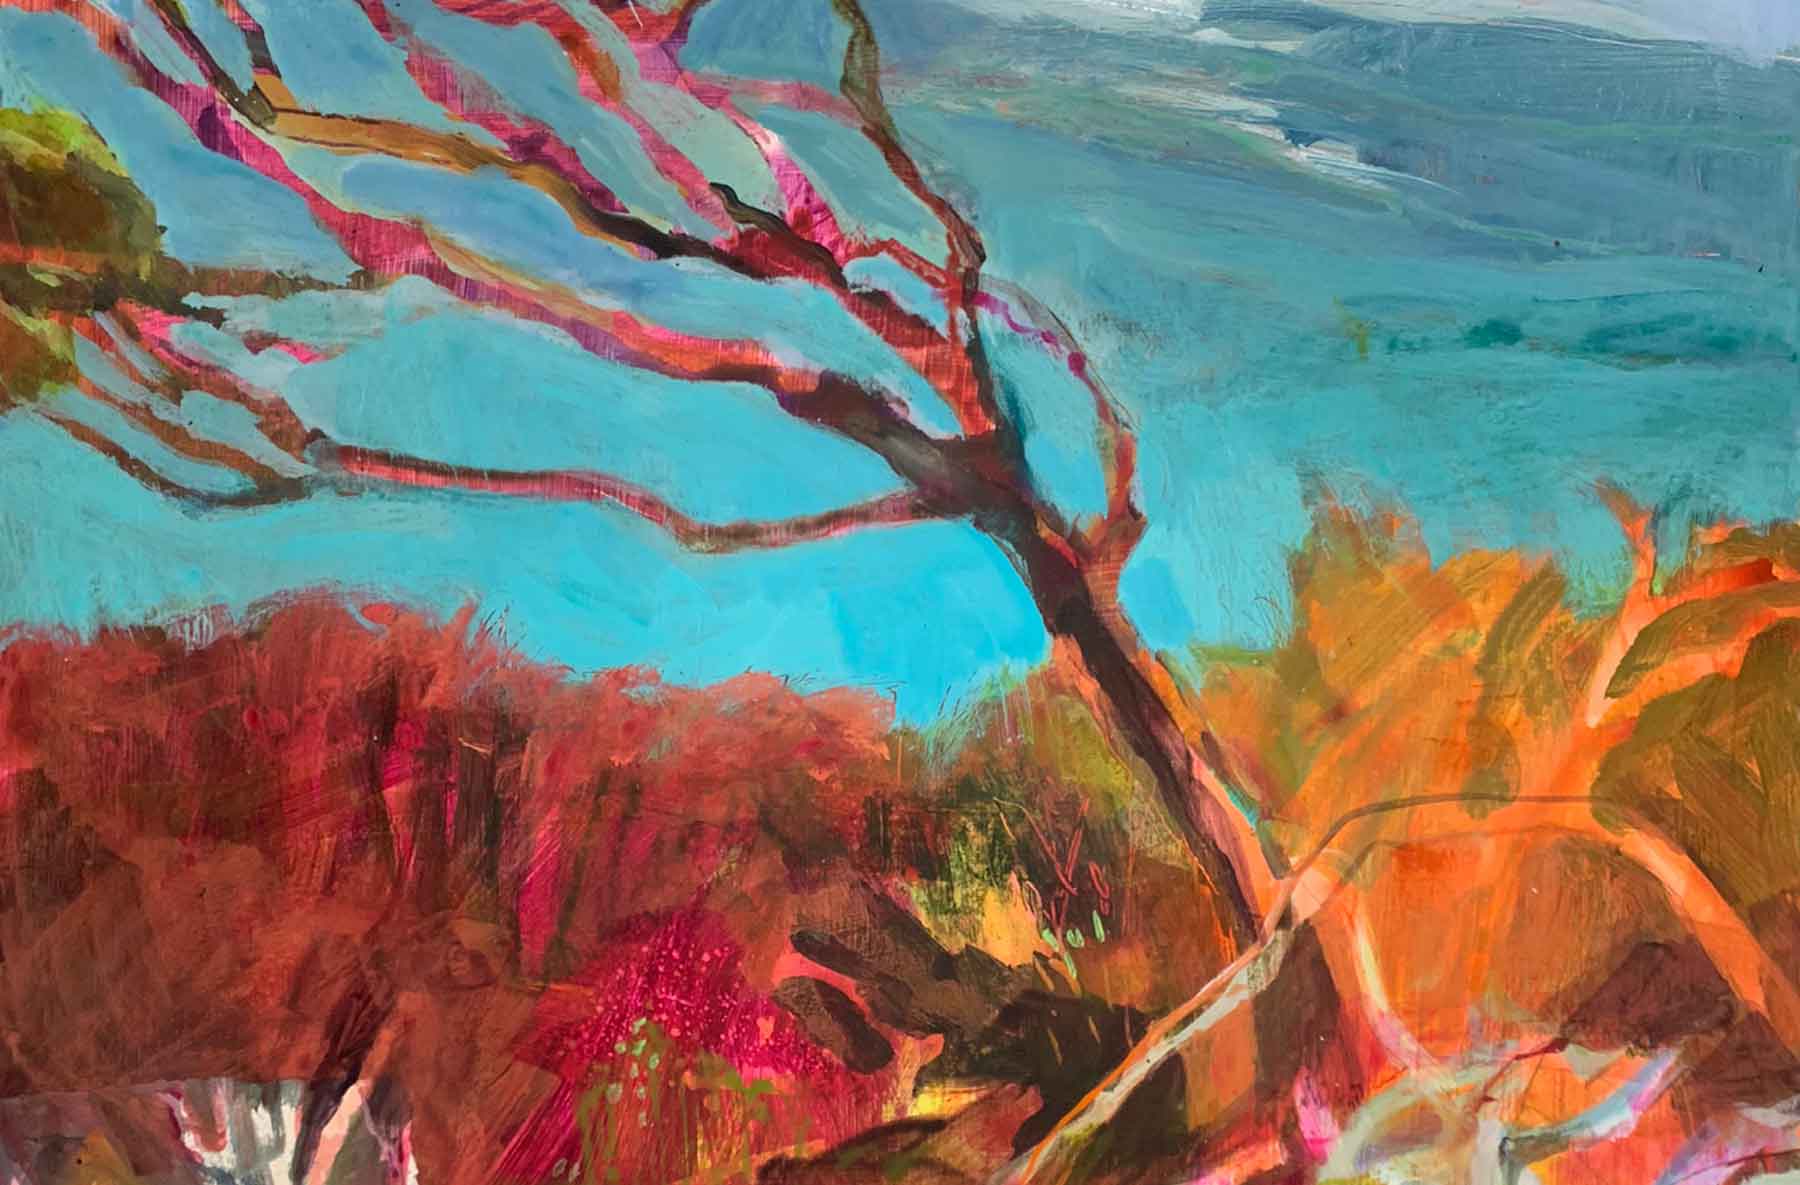 Oil painting of bare red trees against a bright blue ocean in Australia